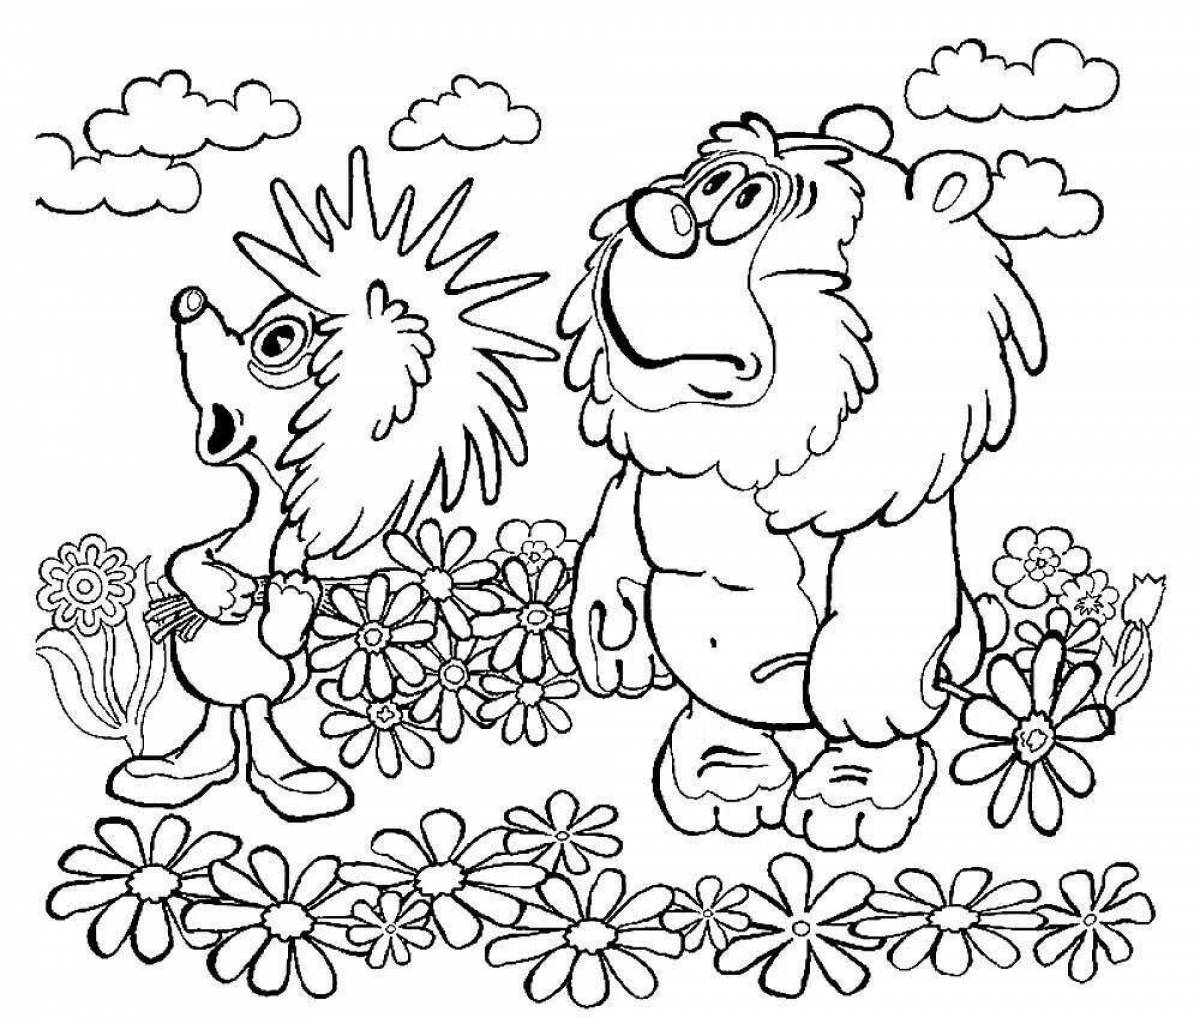 Hedgehog and teddy bear playful coloring book